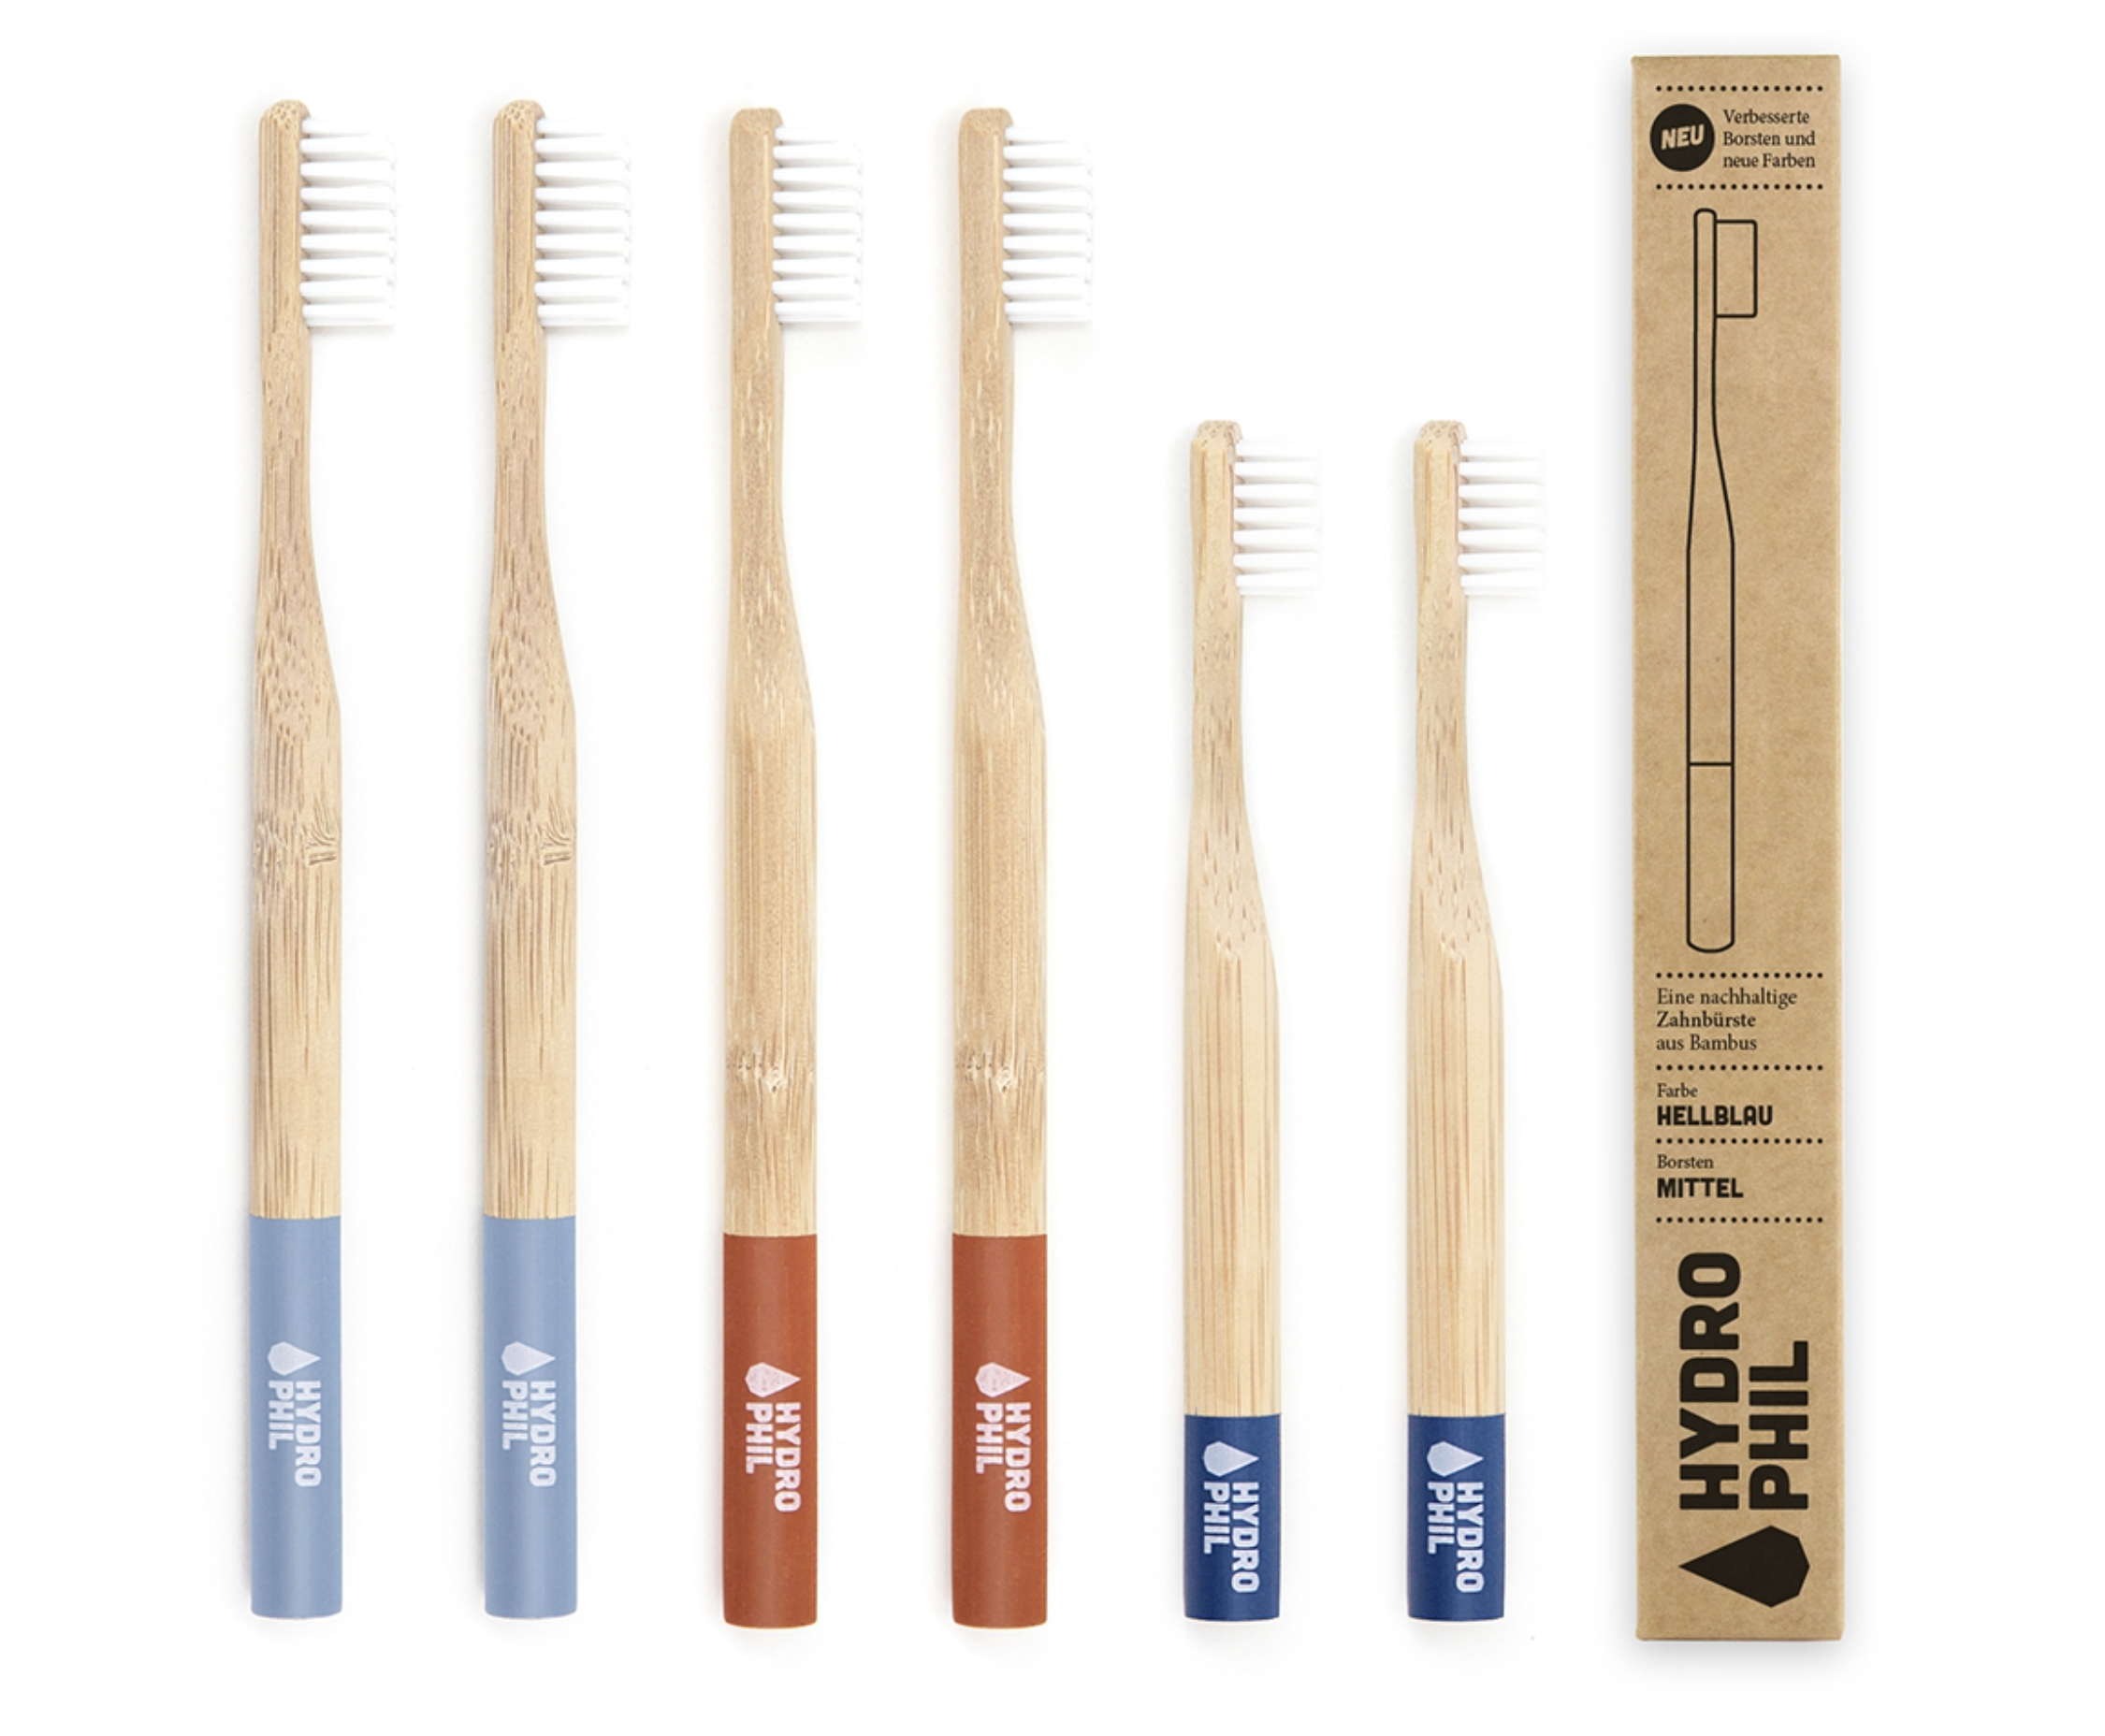 For toothbrushes with no plastic, German brand Hydrophil is for you